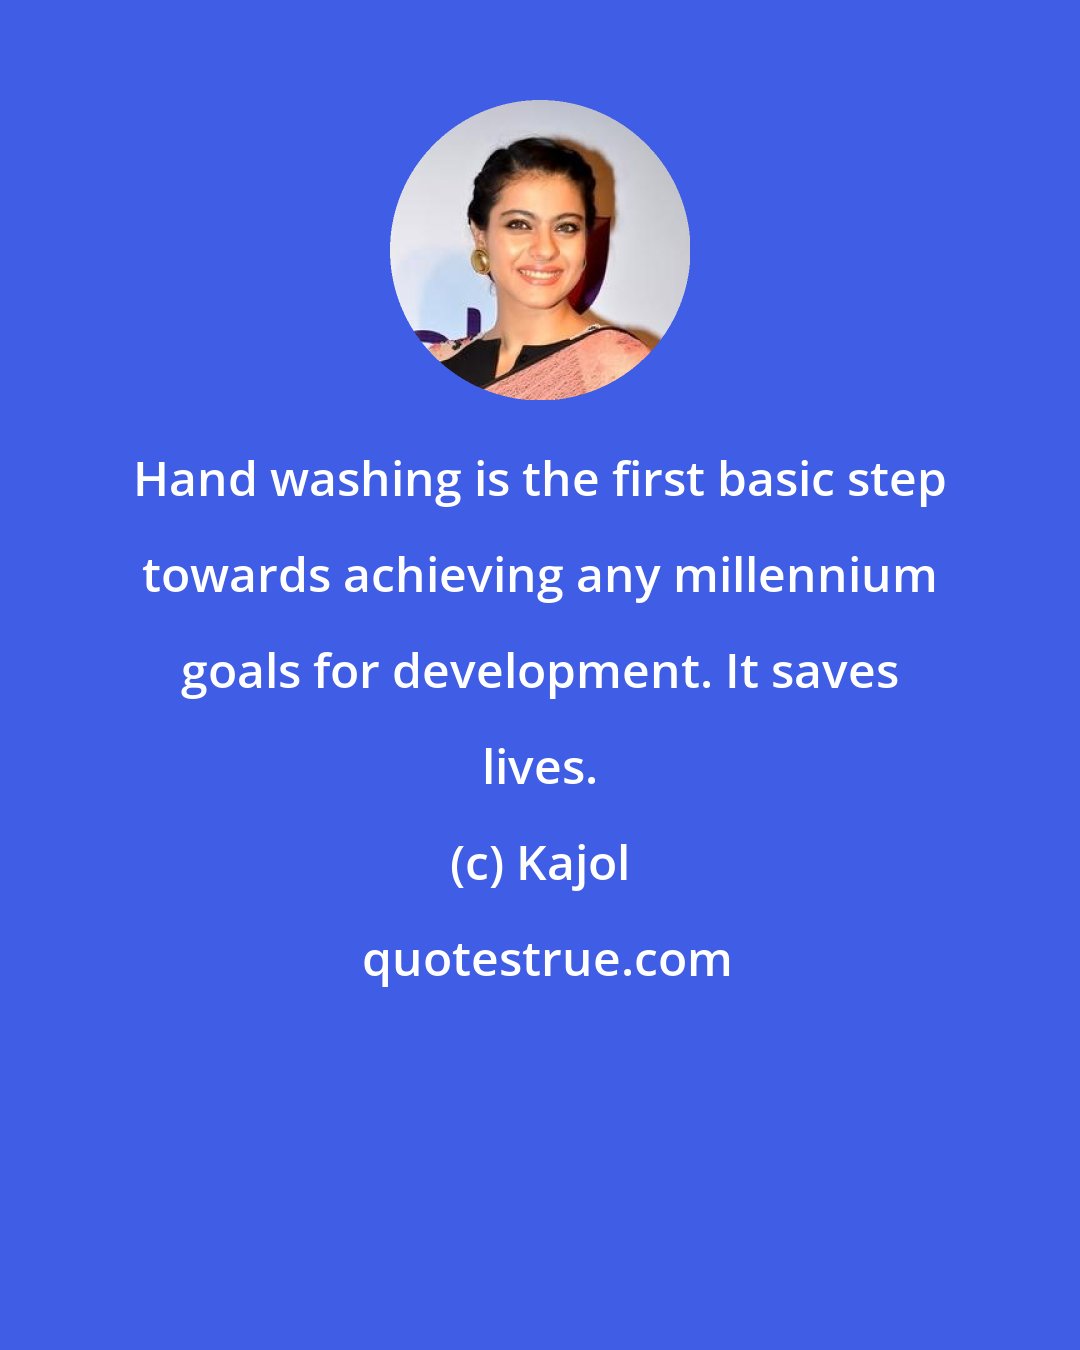 Kajol: Hand washing is the first basic step towards achieving any millennium goals for development. It saves lives.